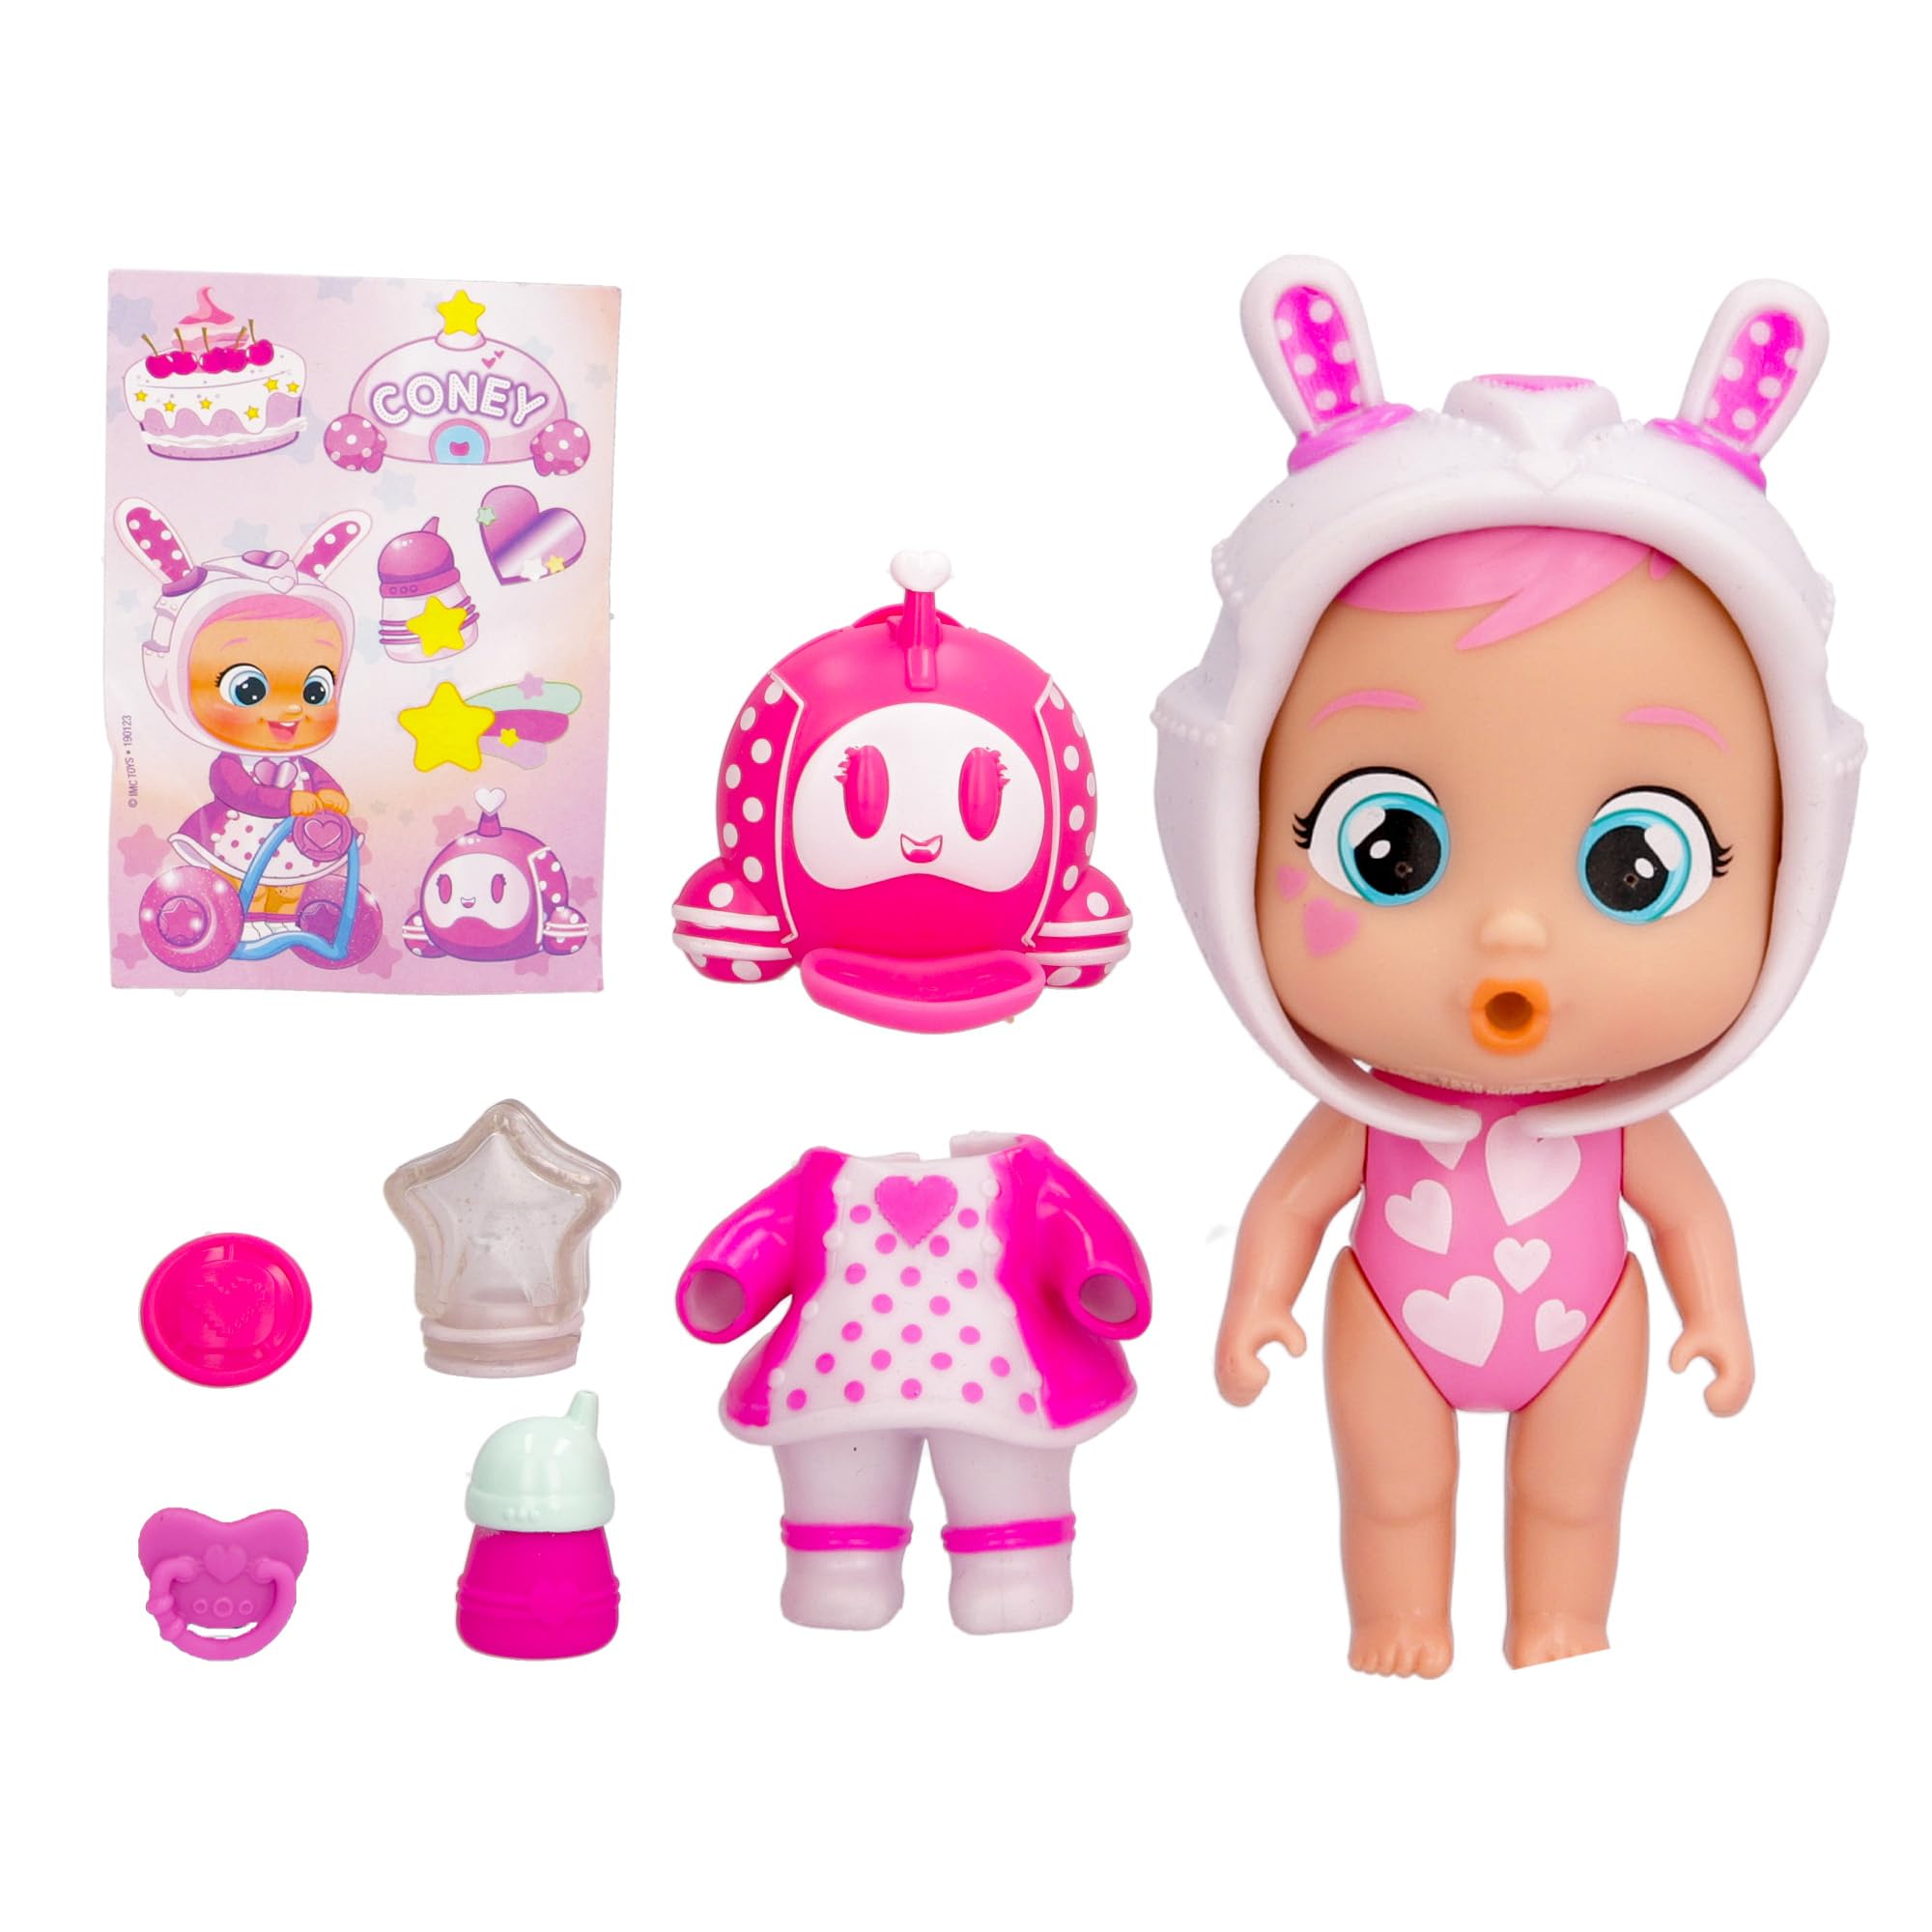 Cry Babies Magic Tears Stars Coney's House - 11+ Surprise Accessories, Doll | Kids Age 3+